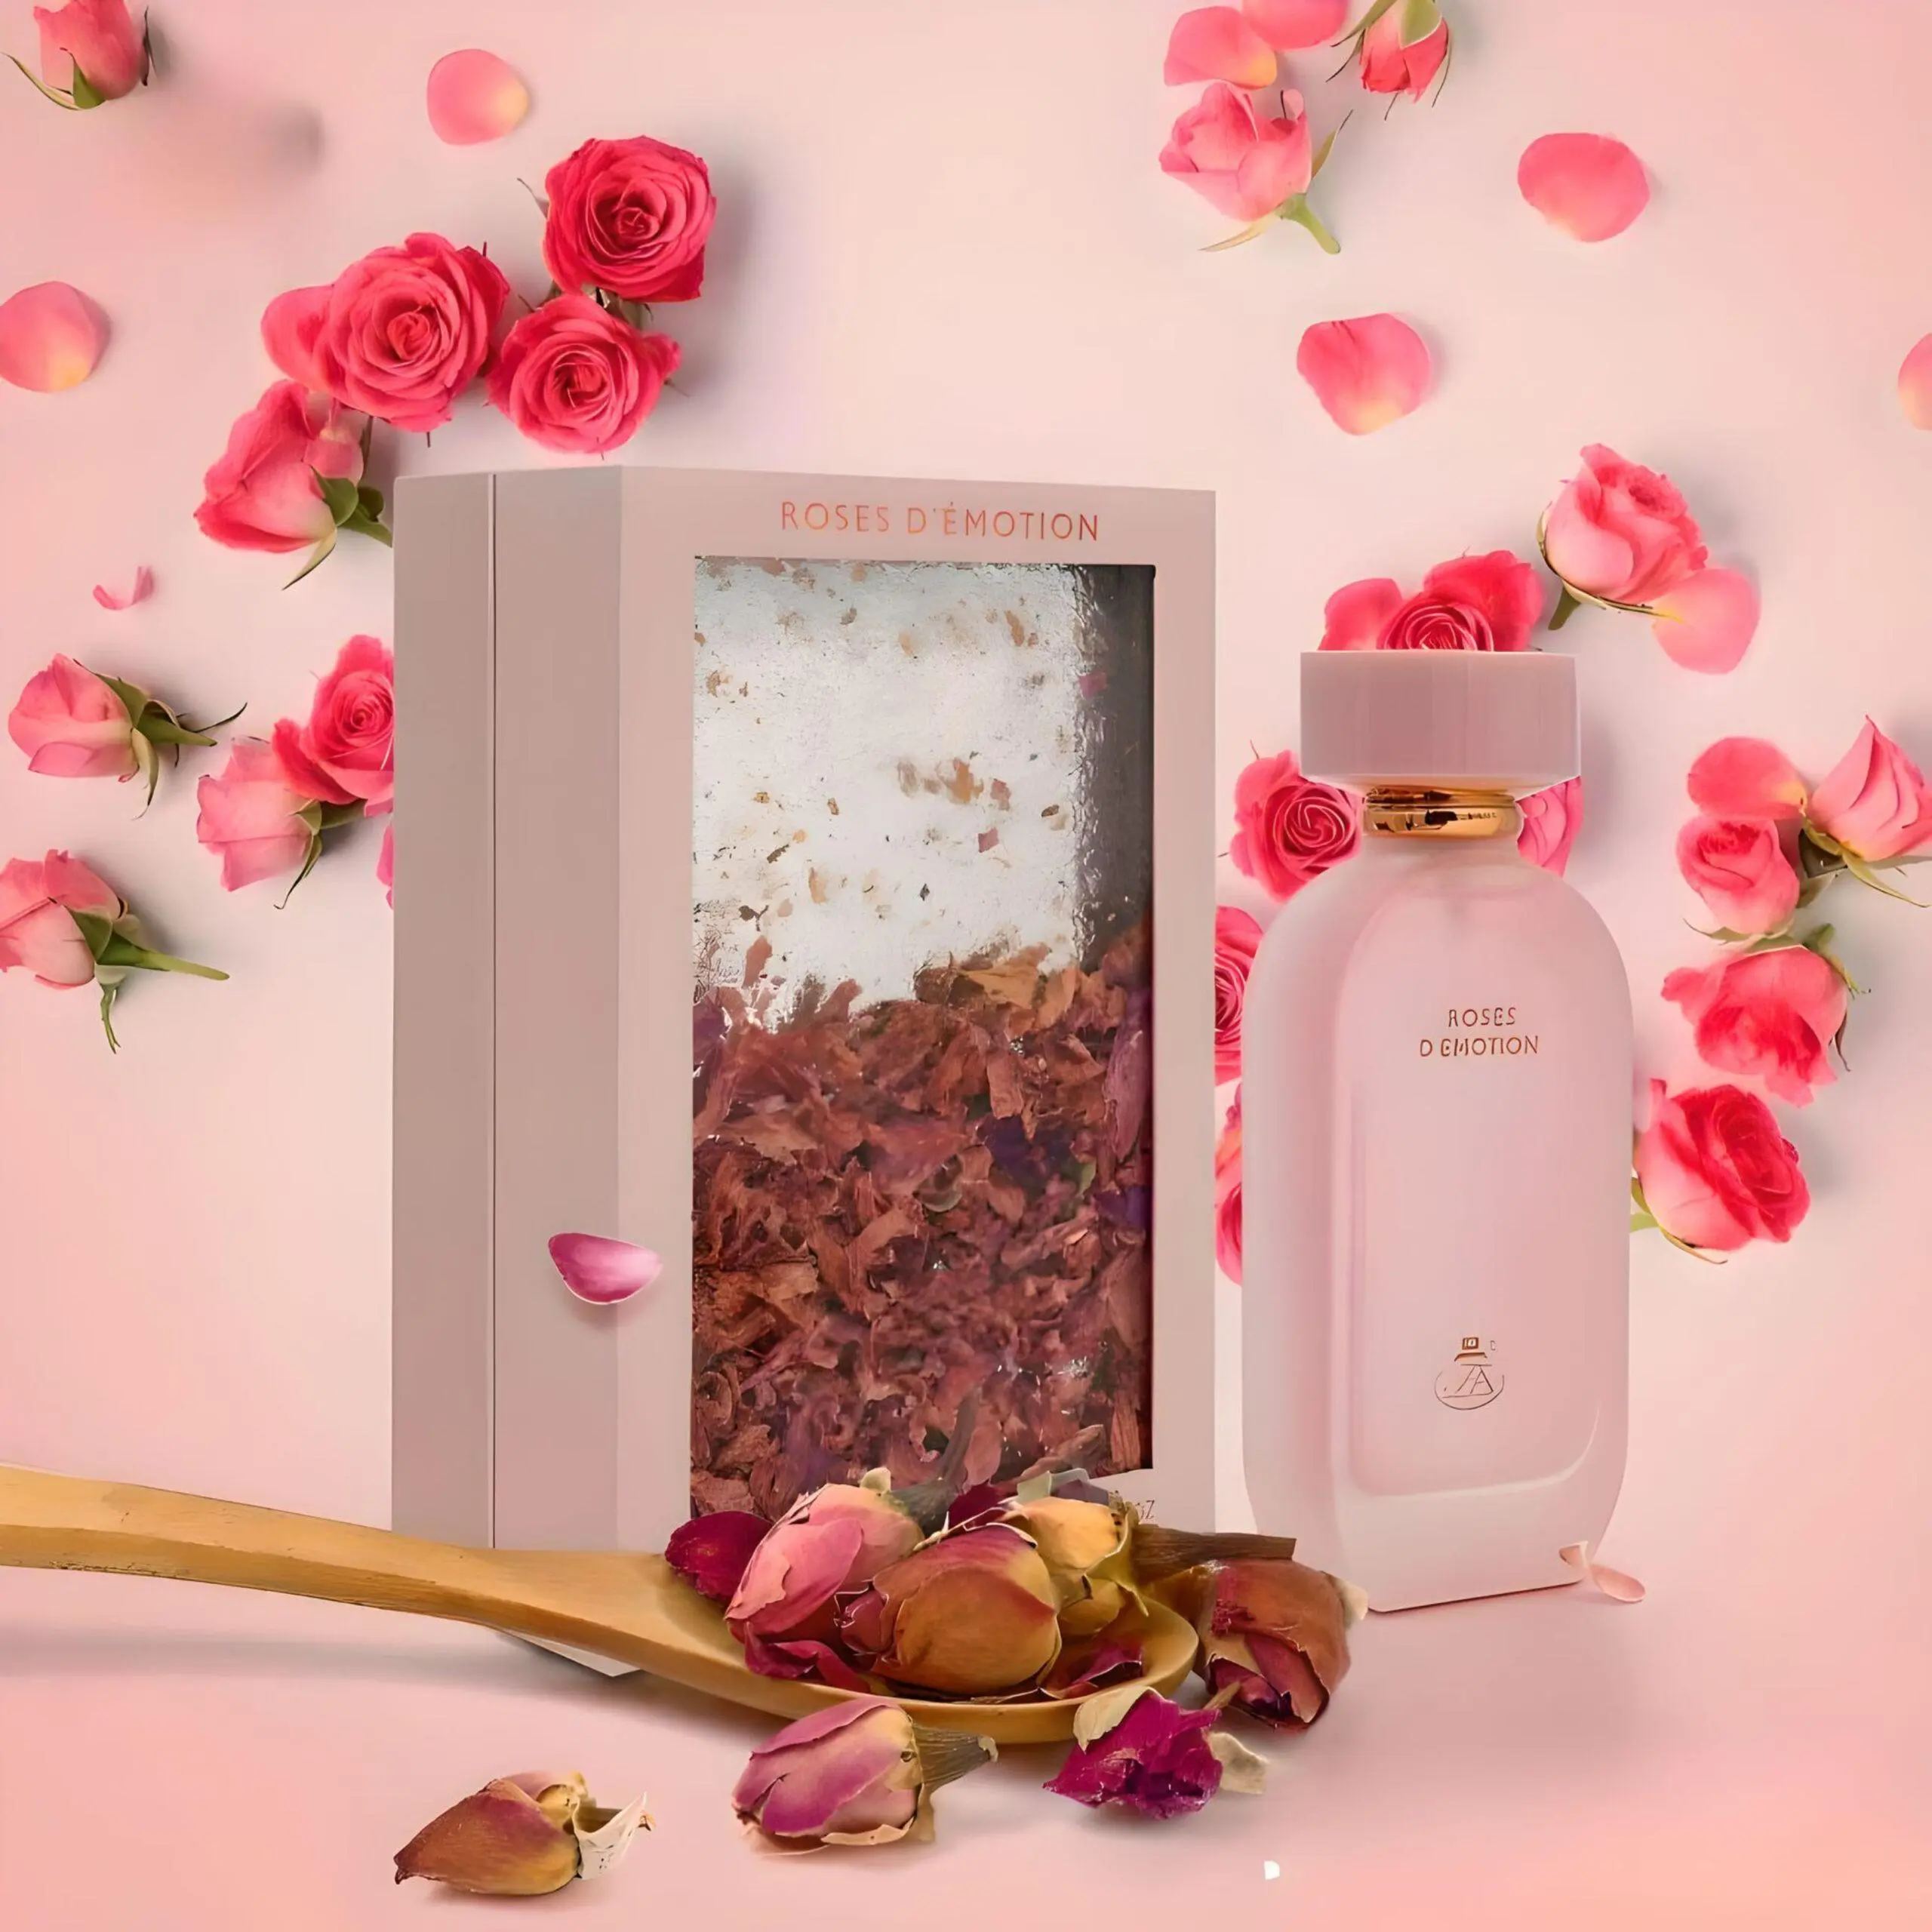 Roses D'Emotion Perfume Eau De Parfum 100Ml By Fa Paris (Fragrance World) (Inspired By Rose Of No Man'S Land)